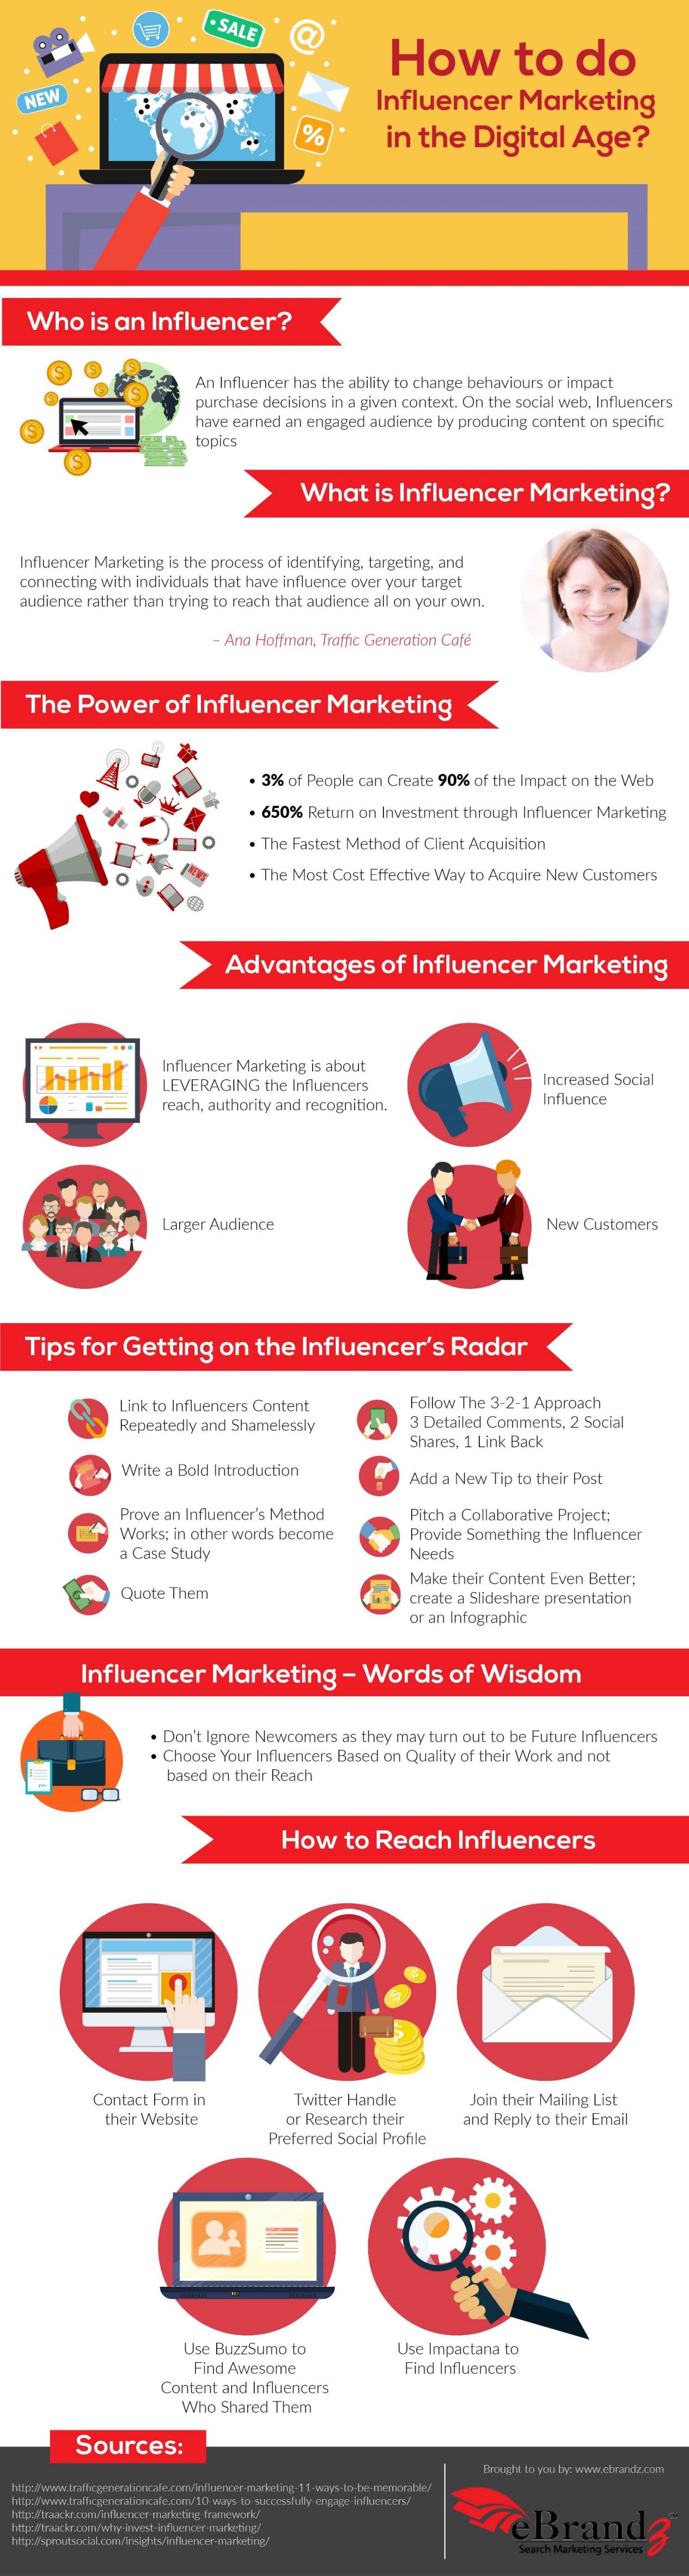 How to Do Influencer Marketing in the Digital Age? [Infographic]